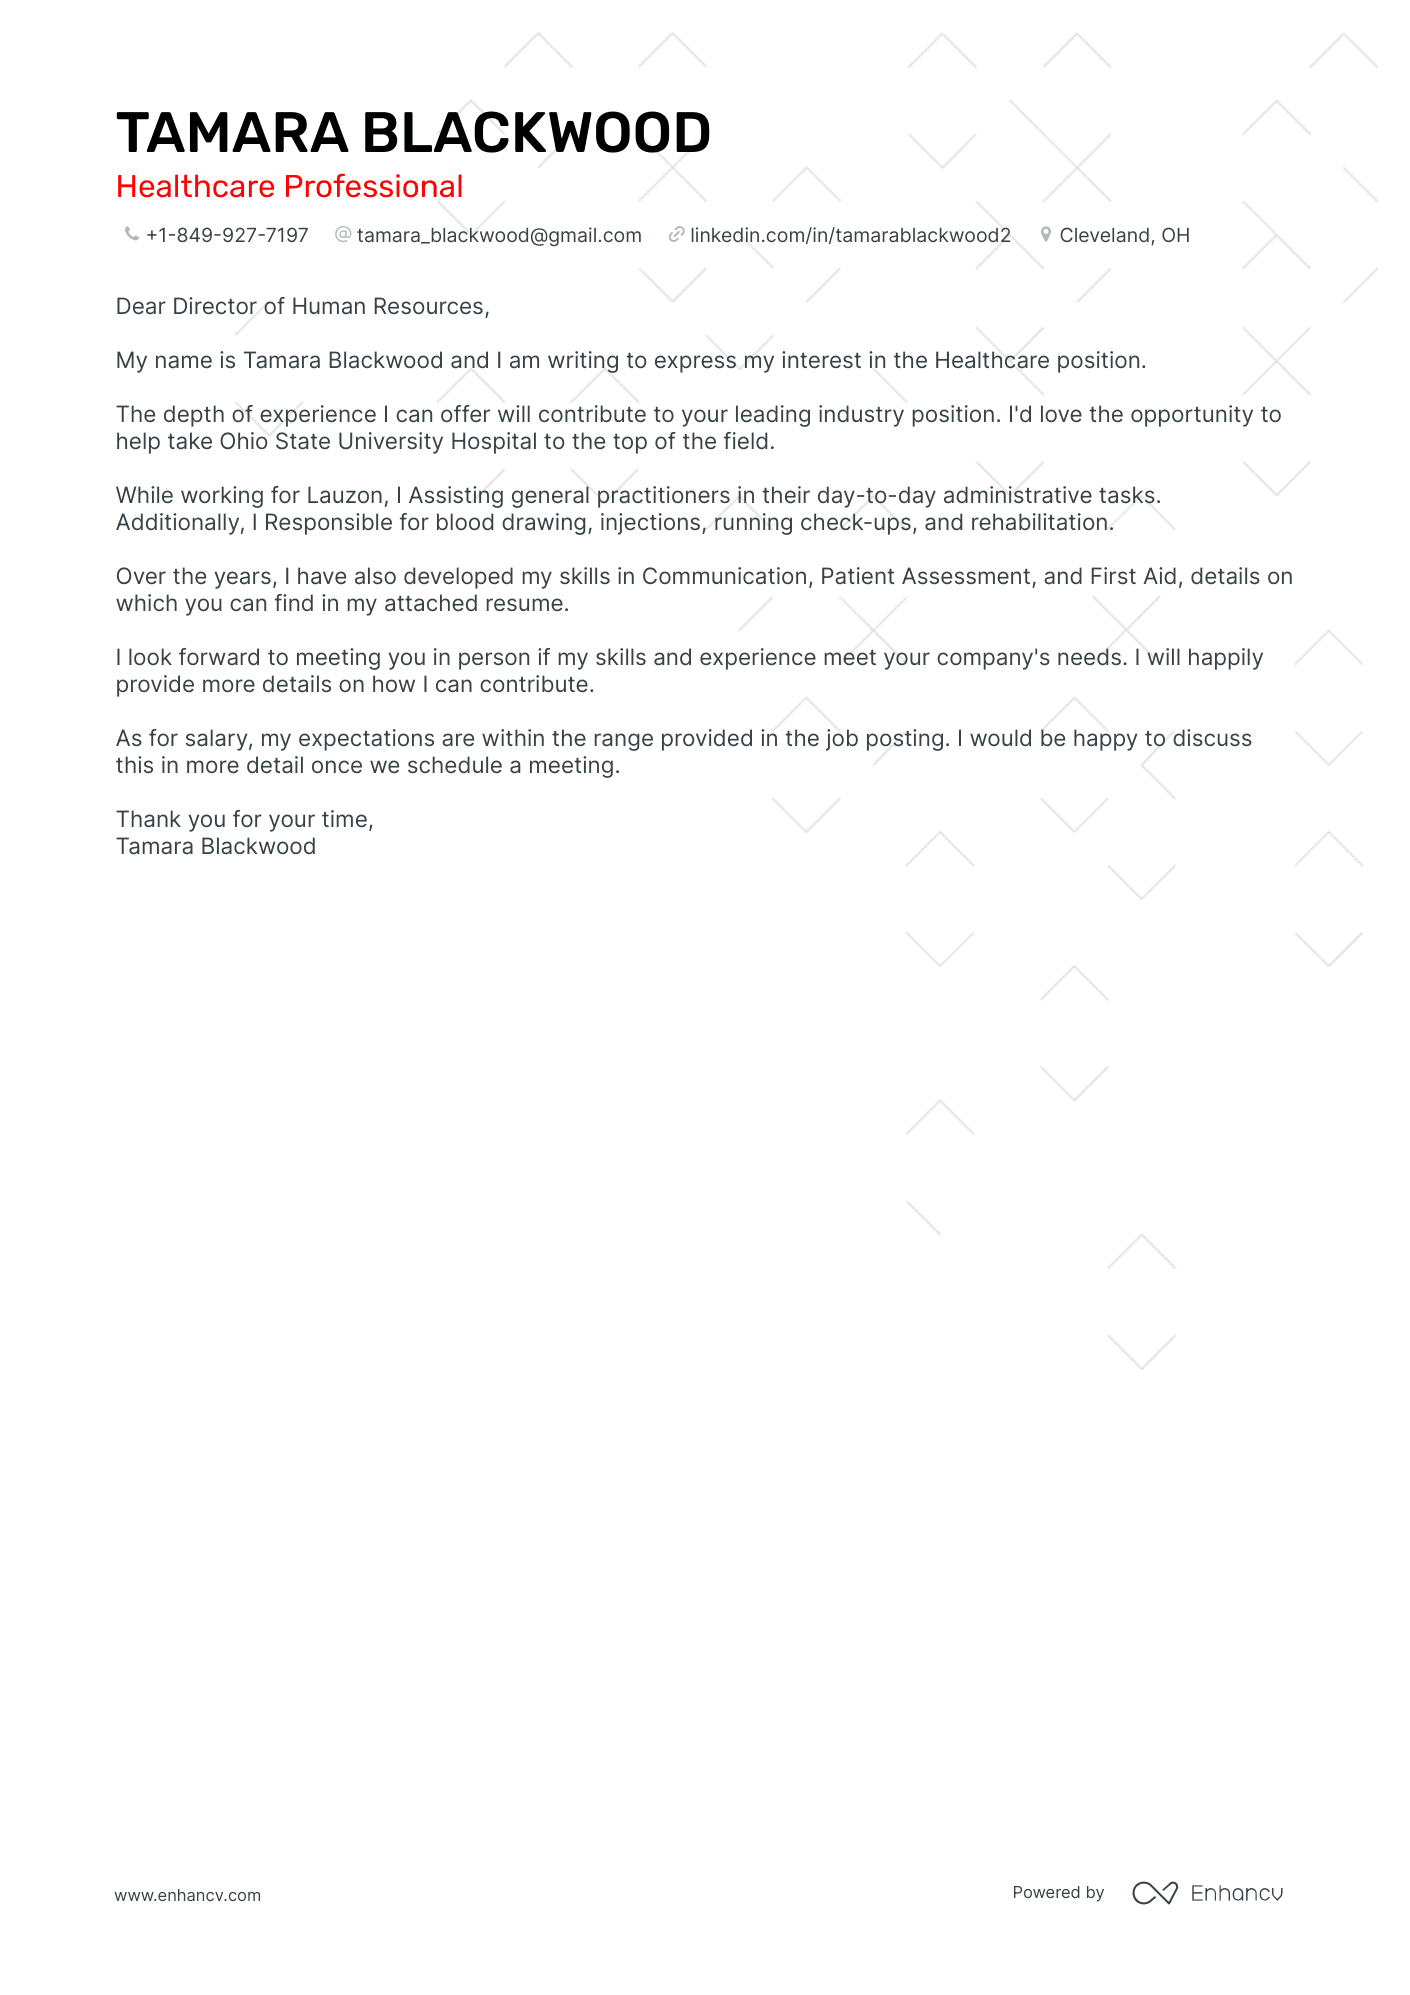 Healthcare cover letter